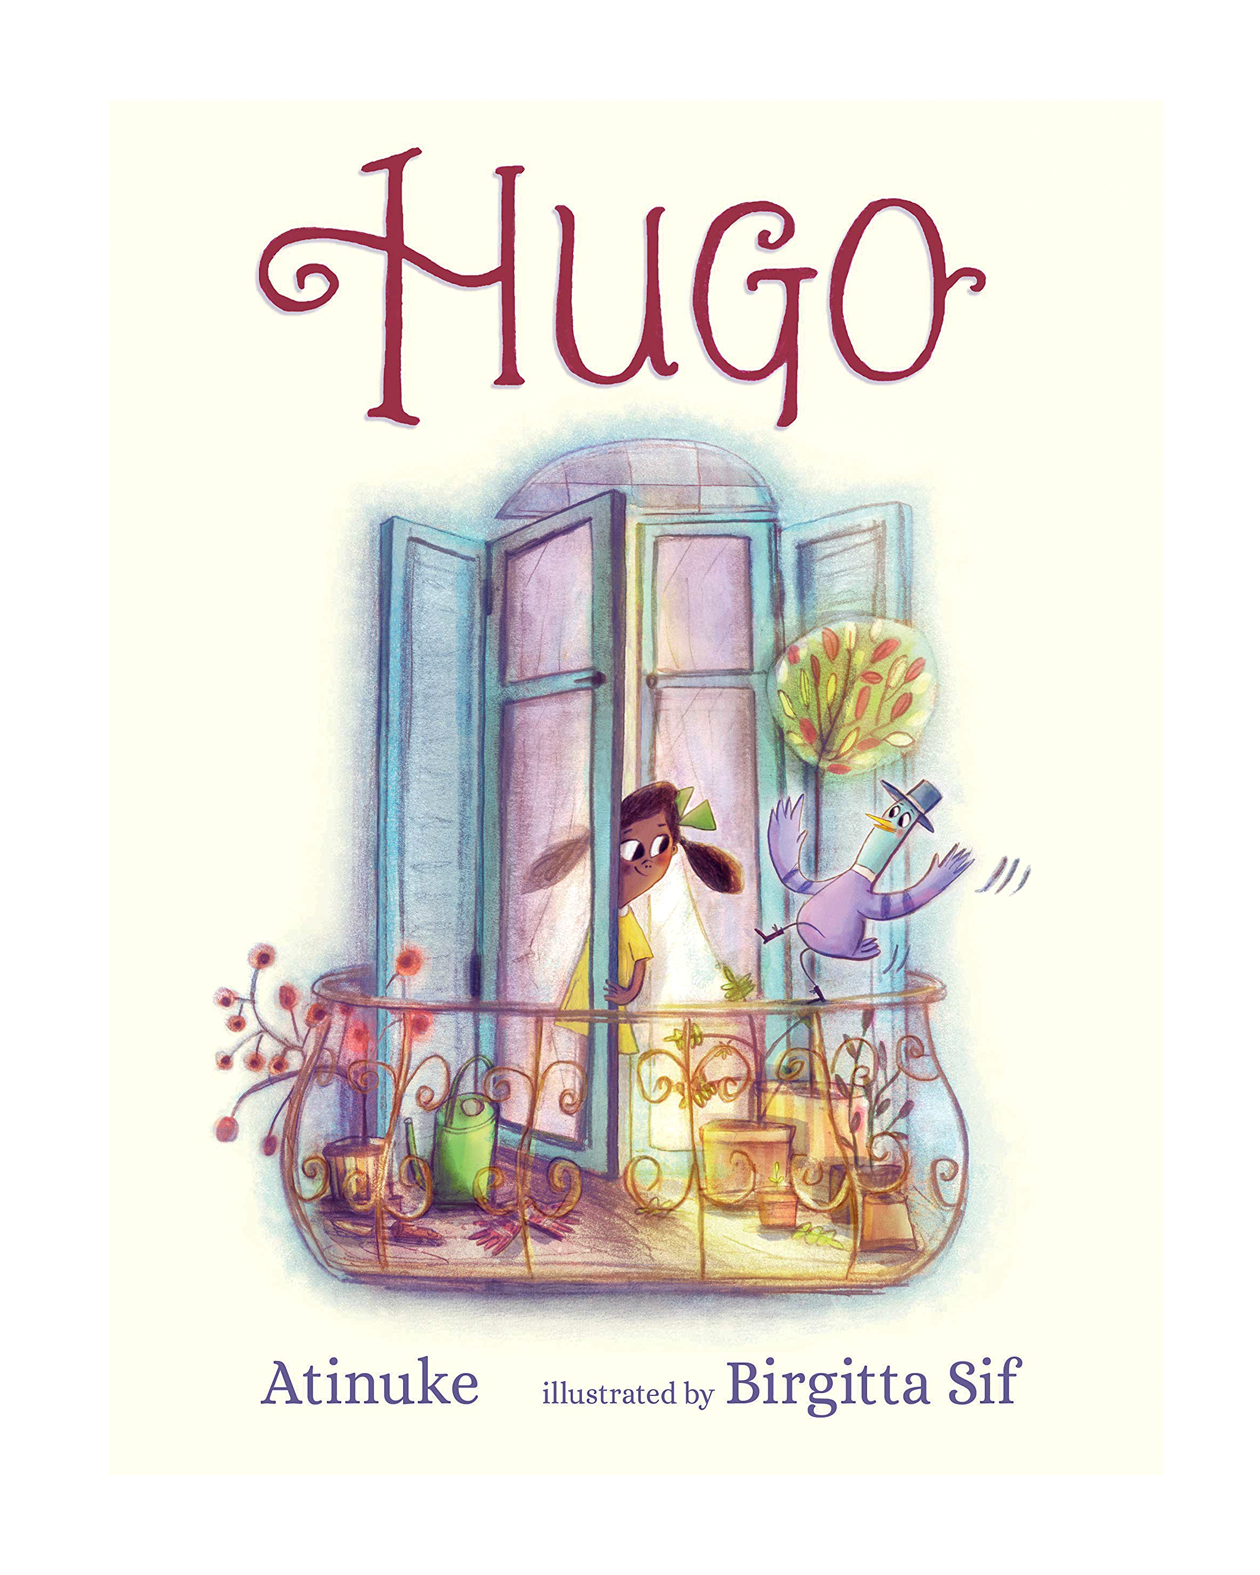 The cover of "Hugo"